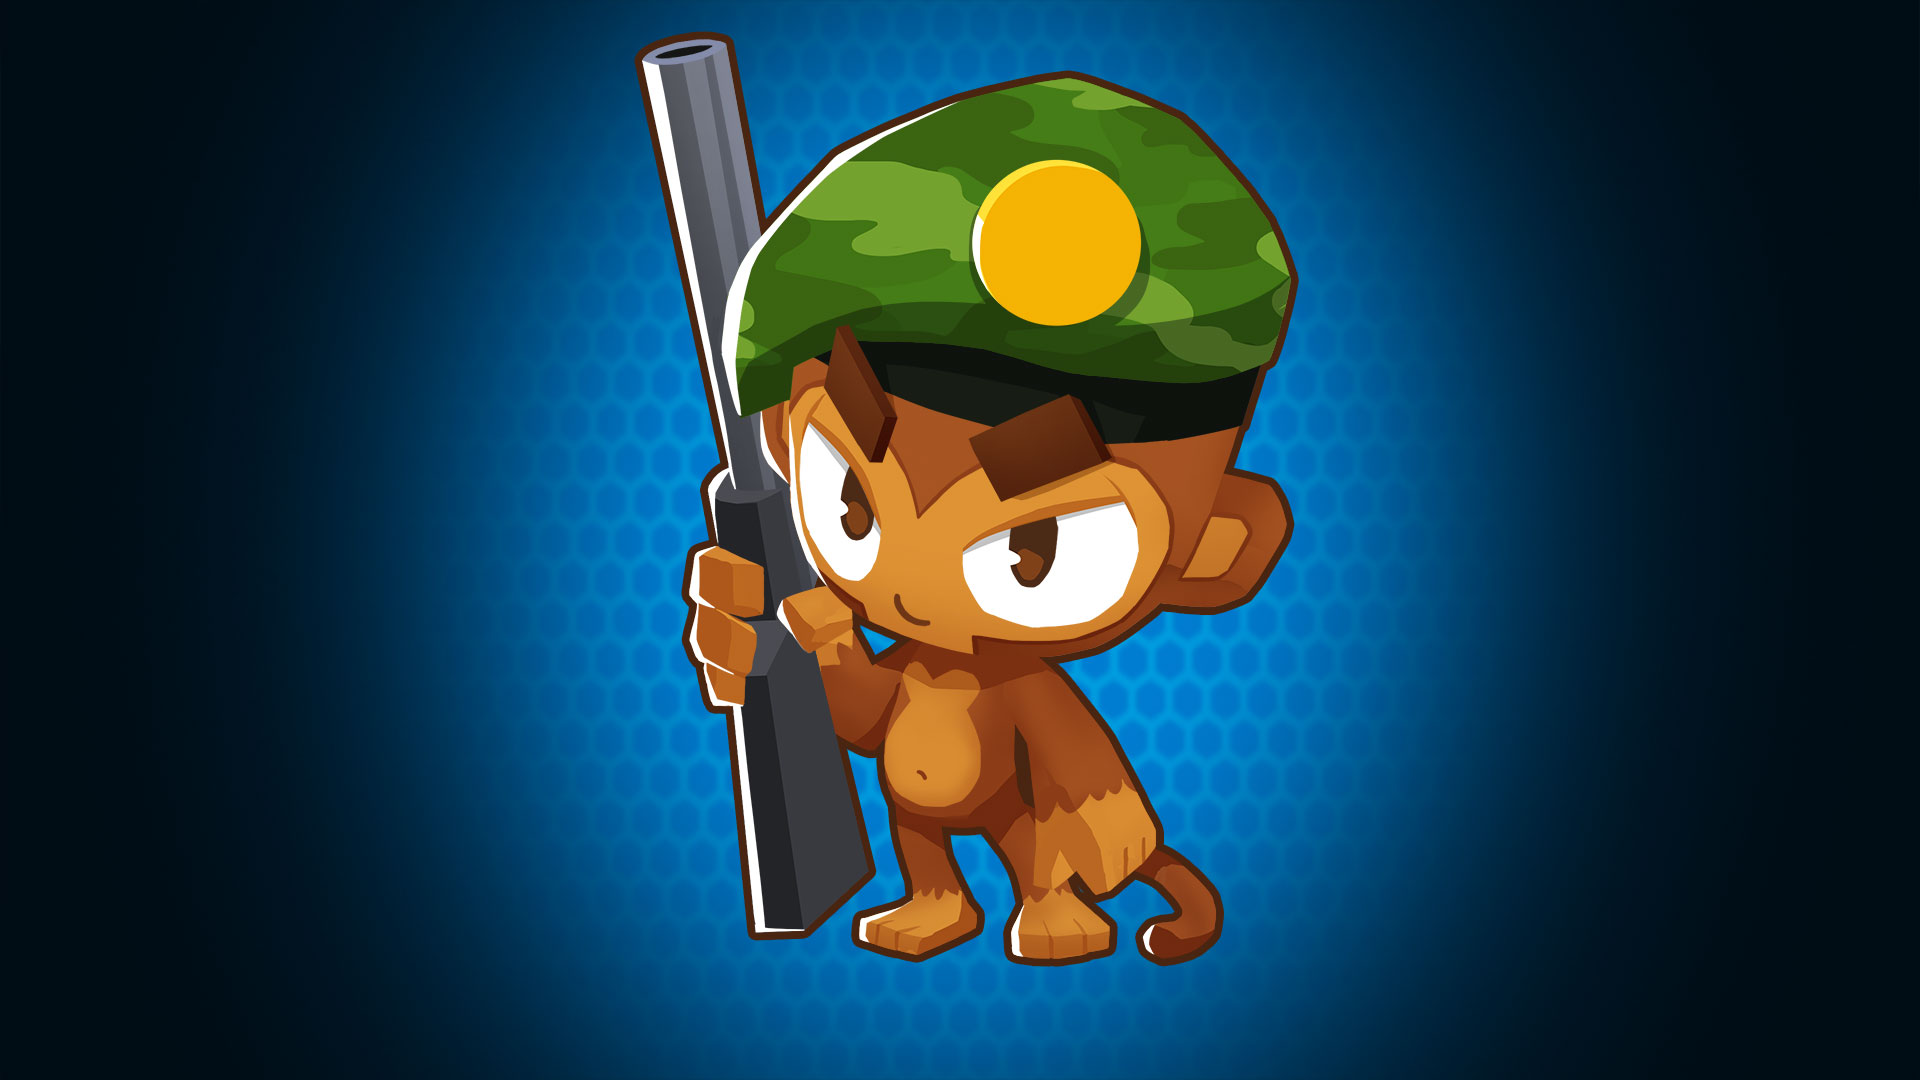 HD wallpaper of a Bloons TD 6 character holding a weapon, with a blue background, ideal for desktop.